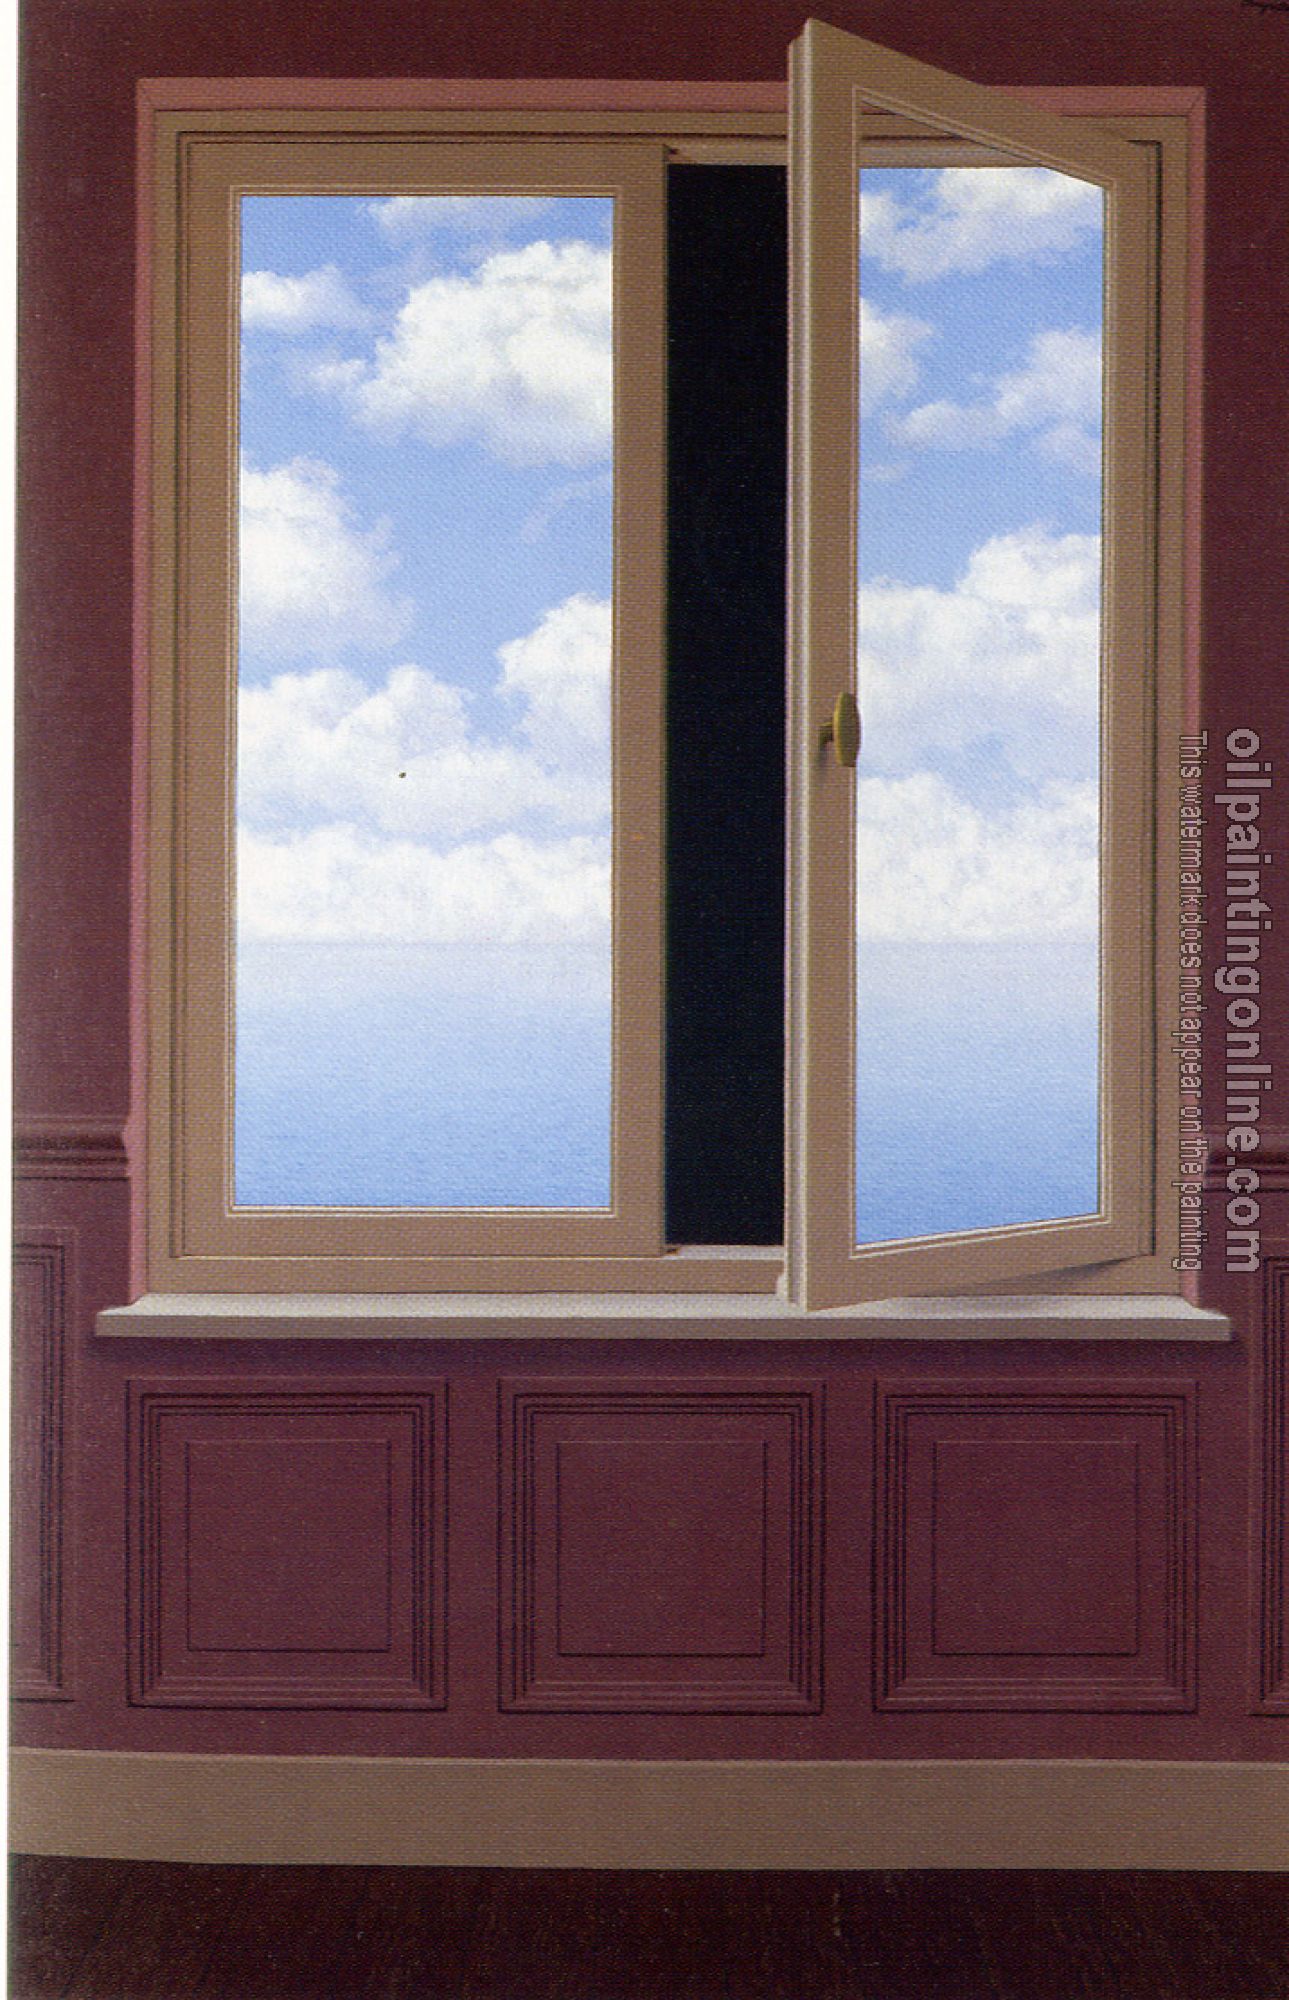 Magritte, Rene - the field glass